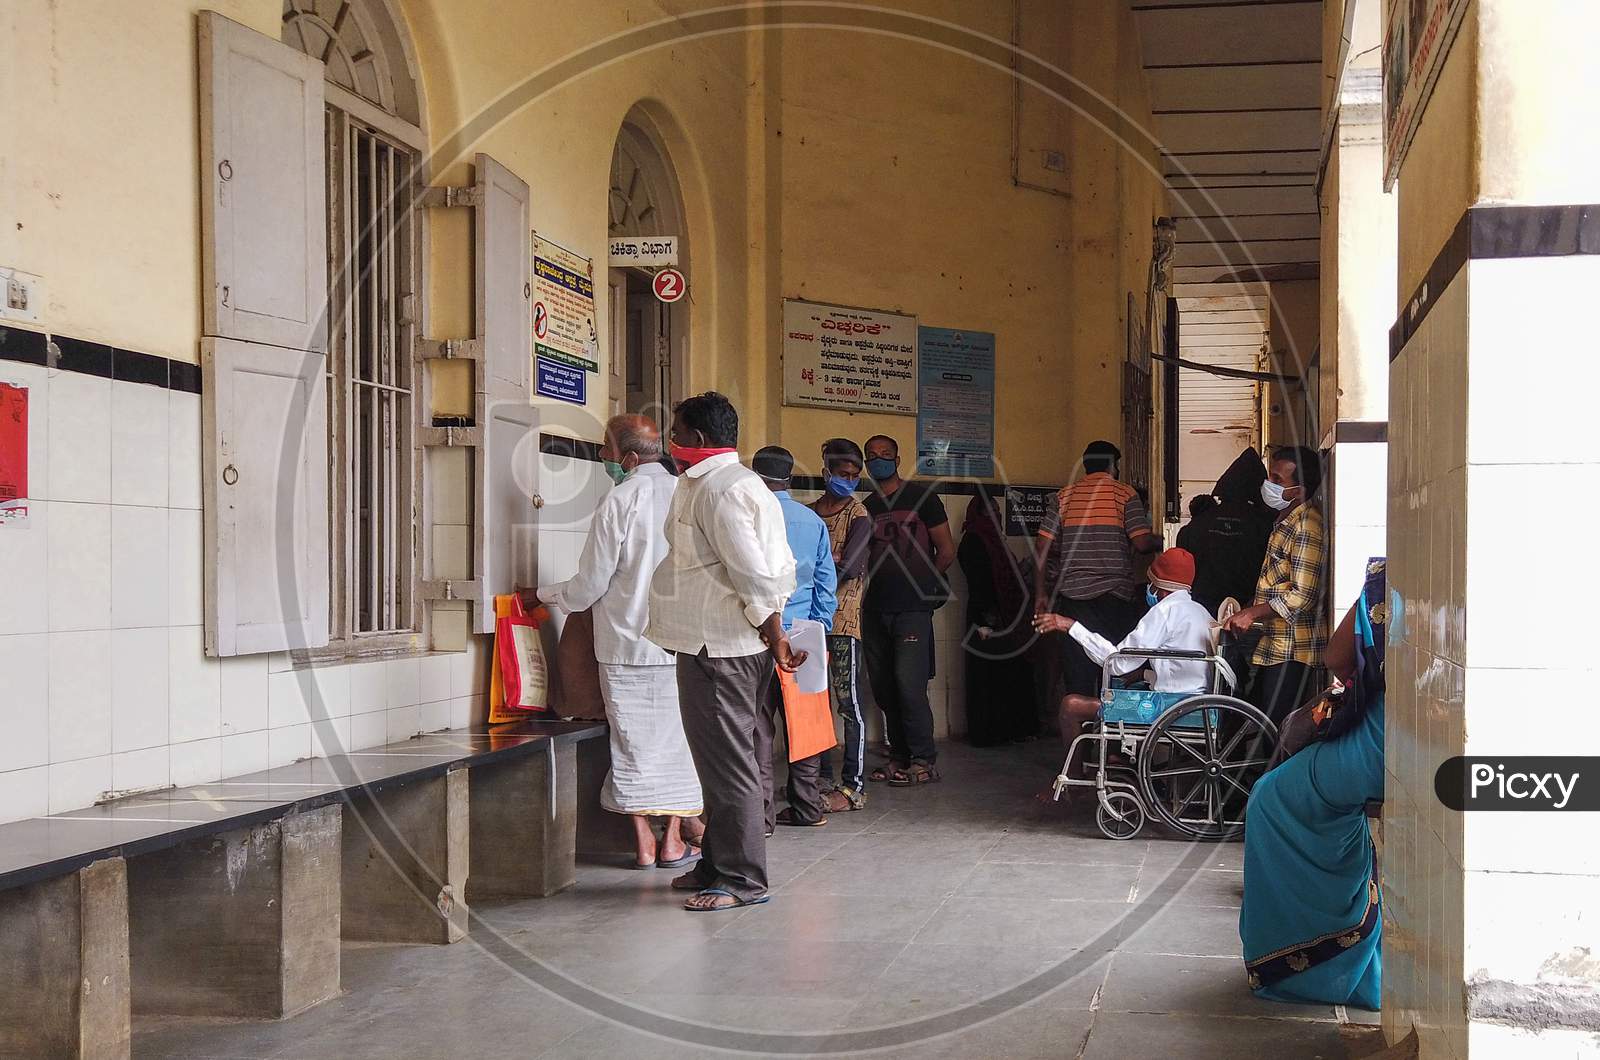 Image Of Patients In Waiting In Kr Hospital In Mysore Karnataka India Rh Picxy